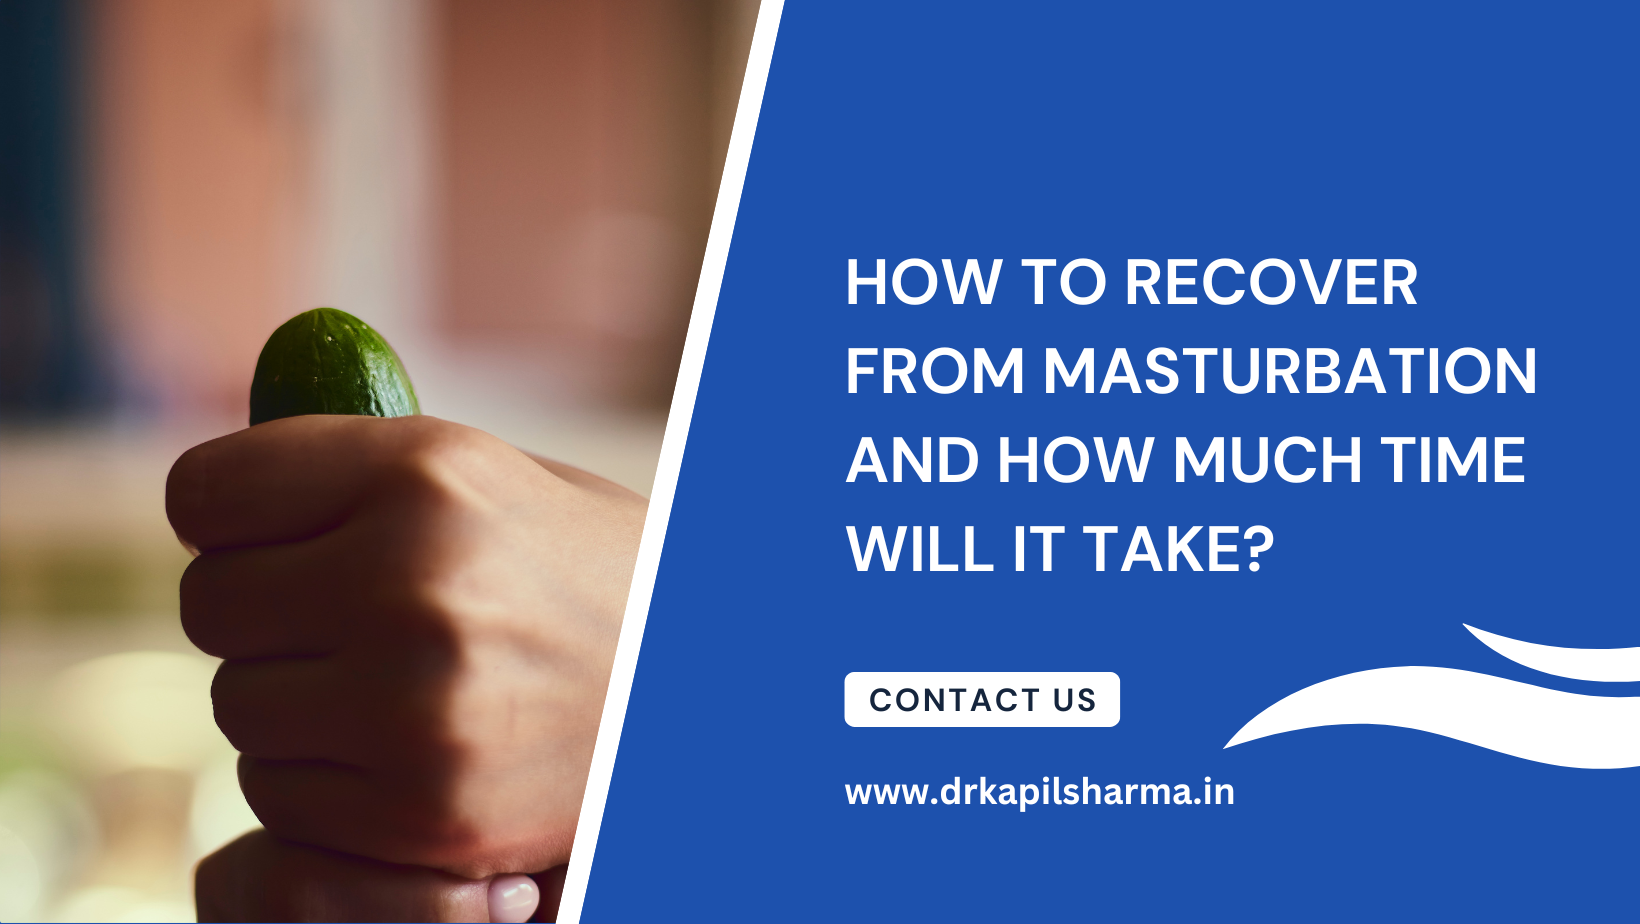 How to Recover from Masturbation and Understanding the Recovery Timeline